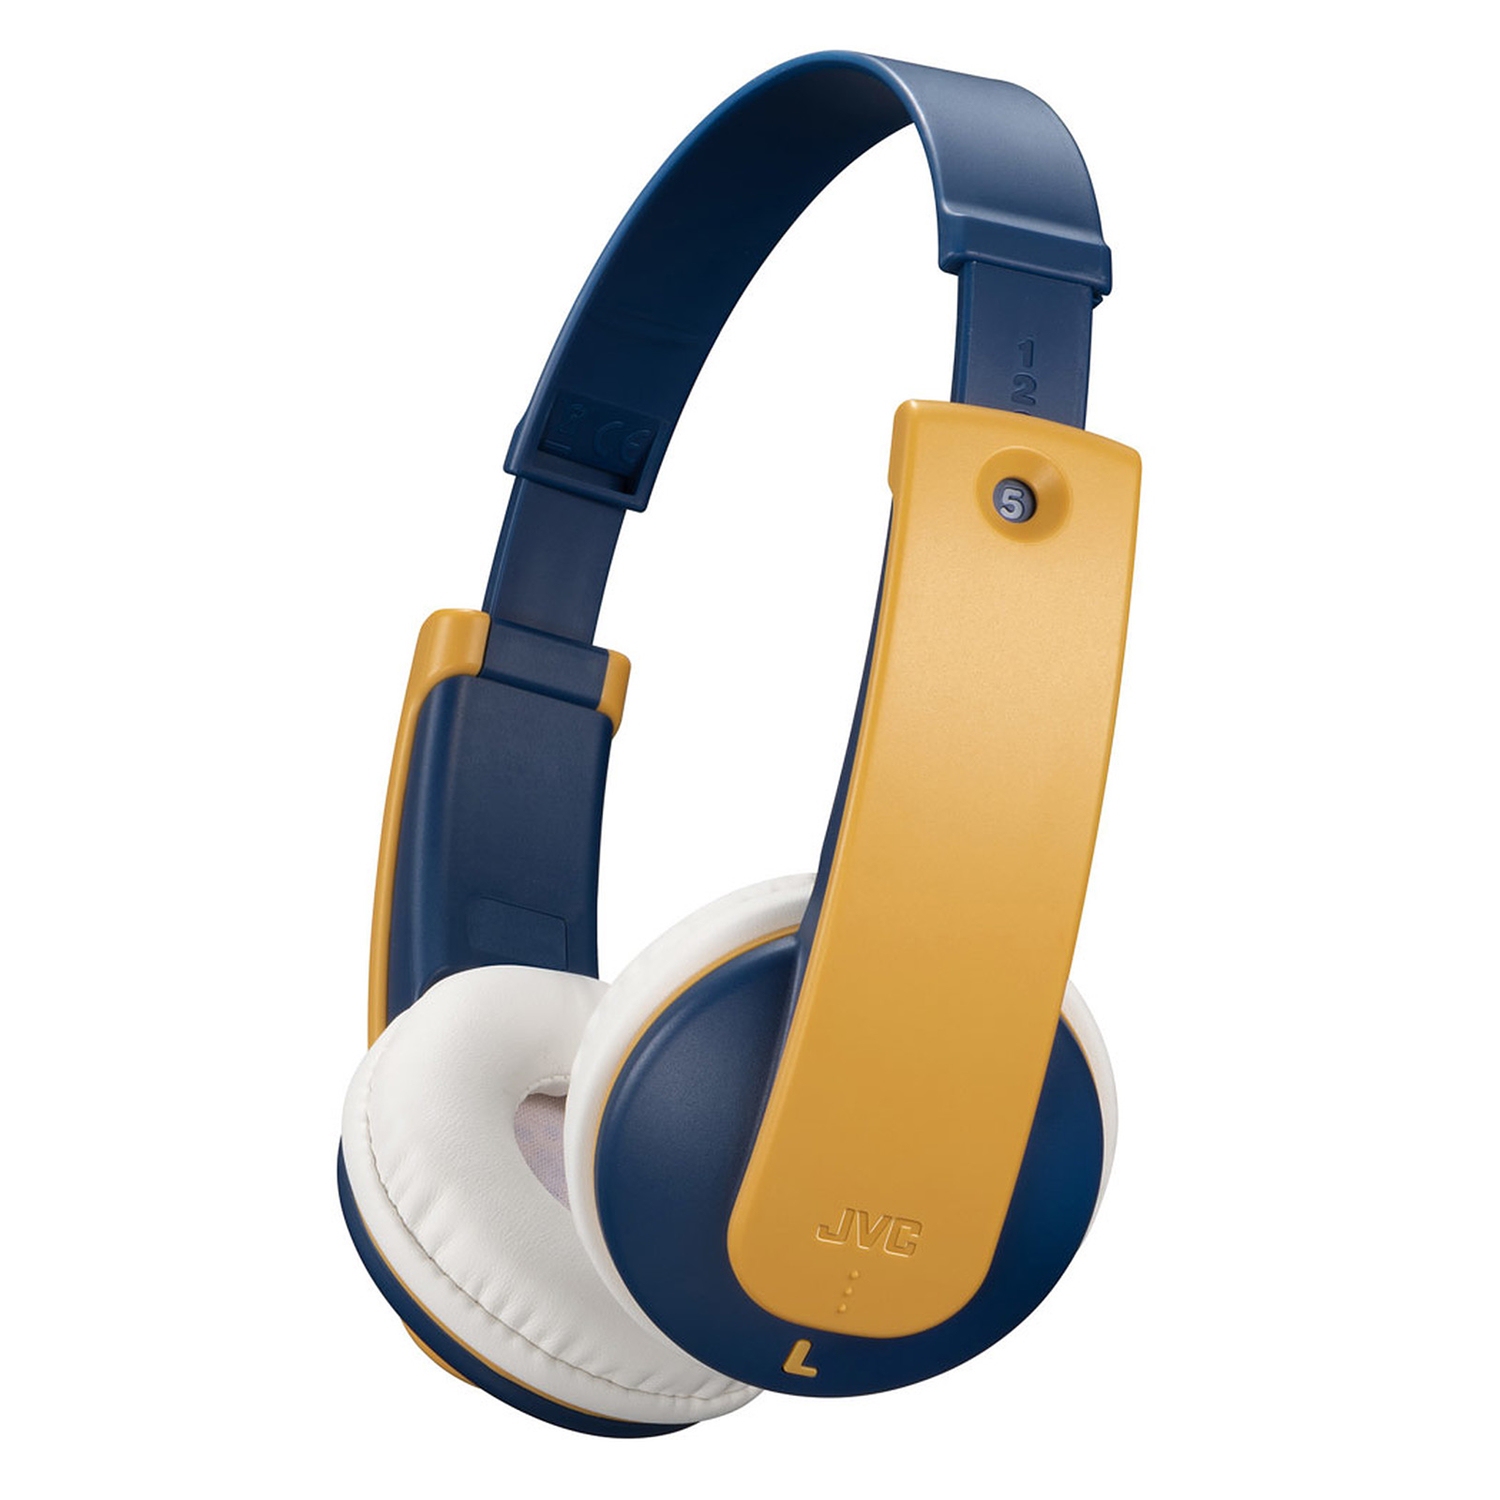 JVC - Wireless Headphones for Children, Bluetooth 5.0, Safe Volume Limiter, Blue and Yellow